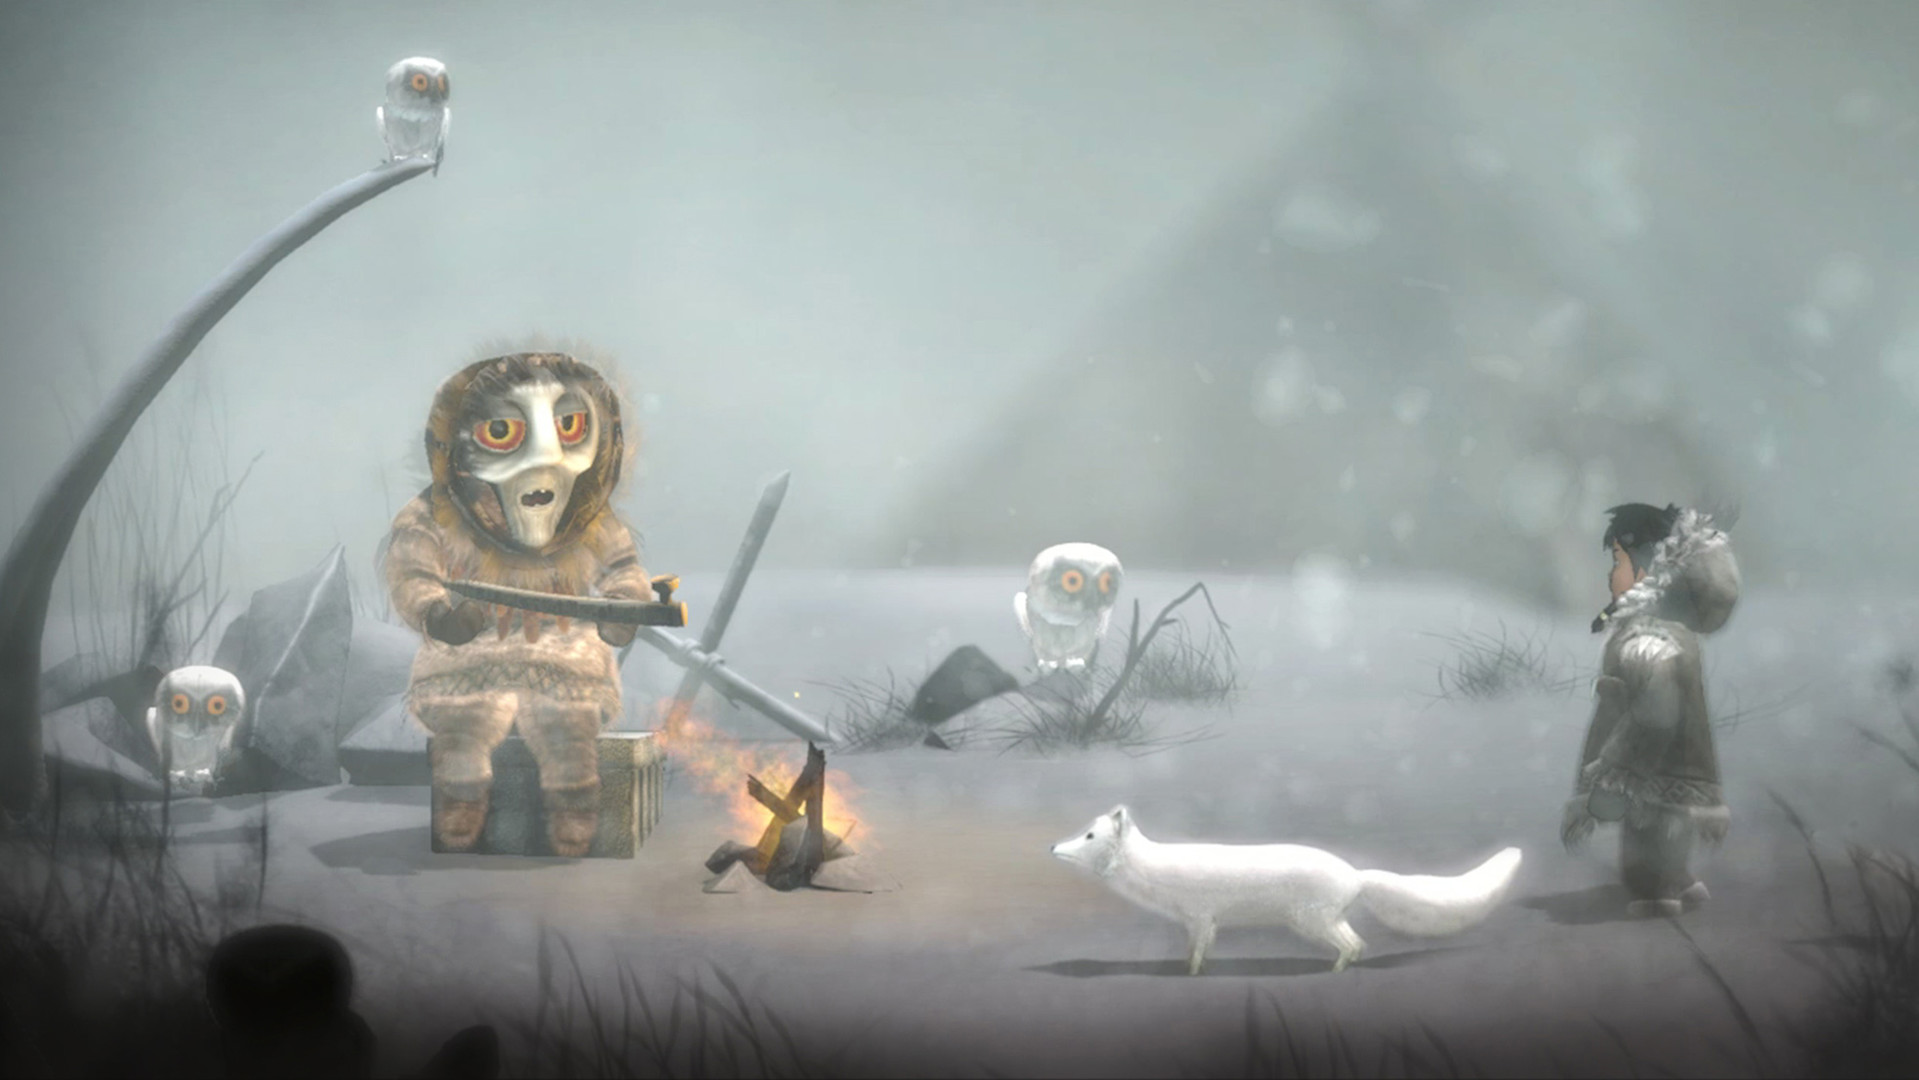 Скриншот *Never Alone - Arctic Collection [PS4] 5.05 / 6.72 / 7.02 [EUR] (2014) [Русский] (v1.04)*